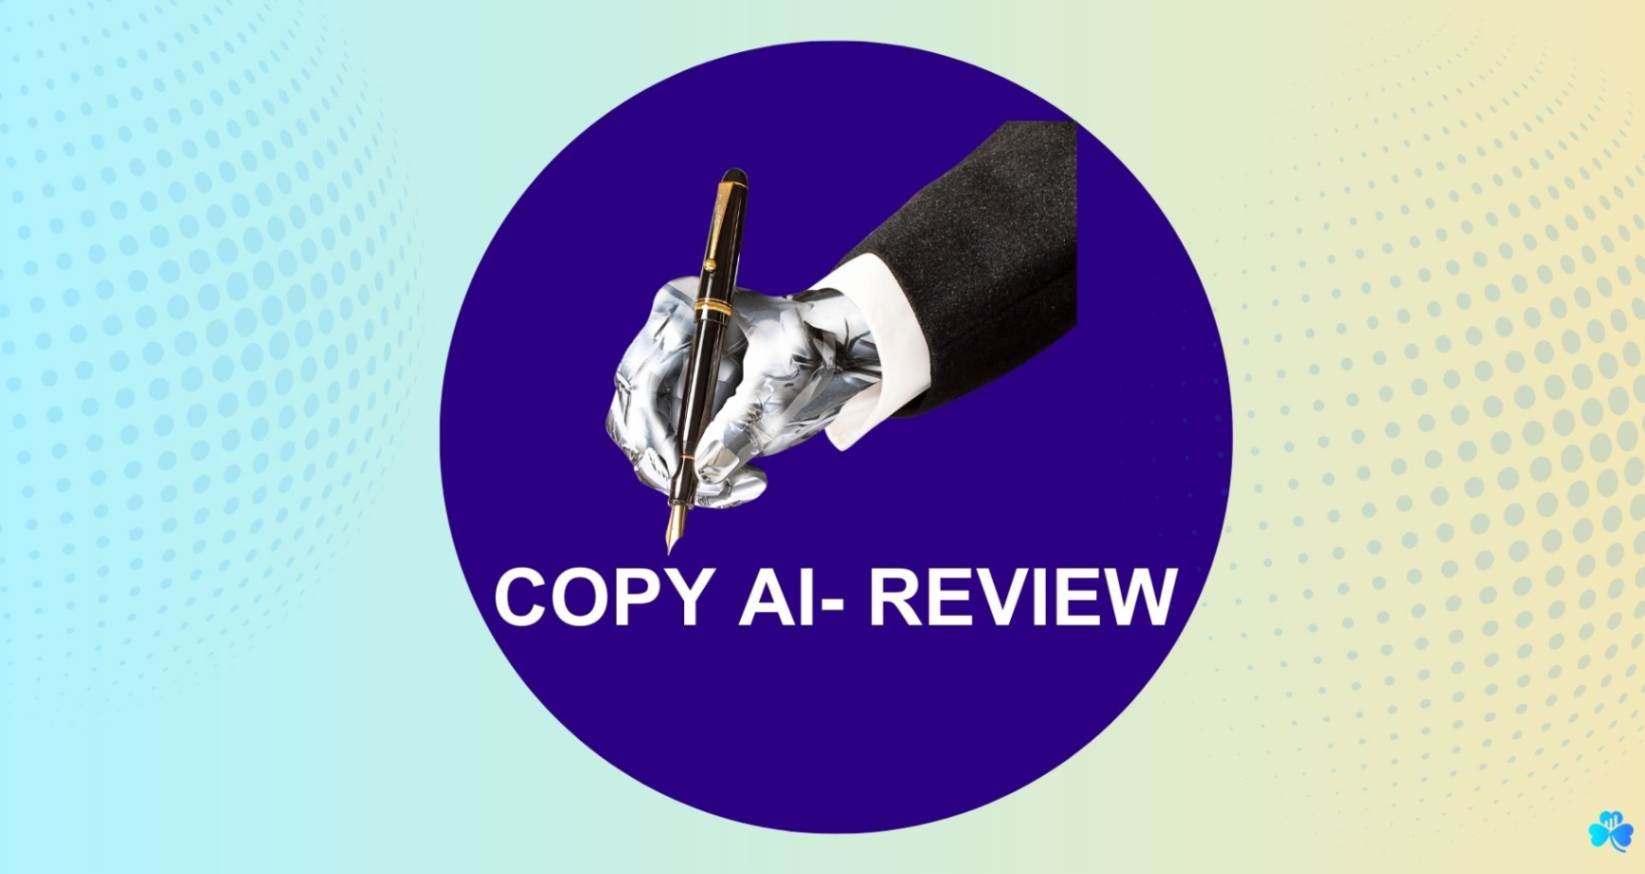 COPY AI REVIEW featured image